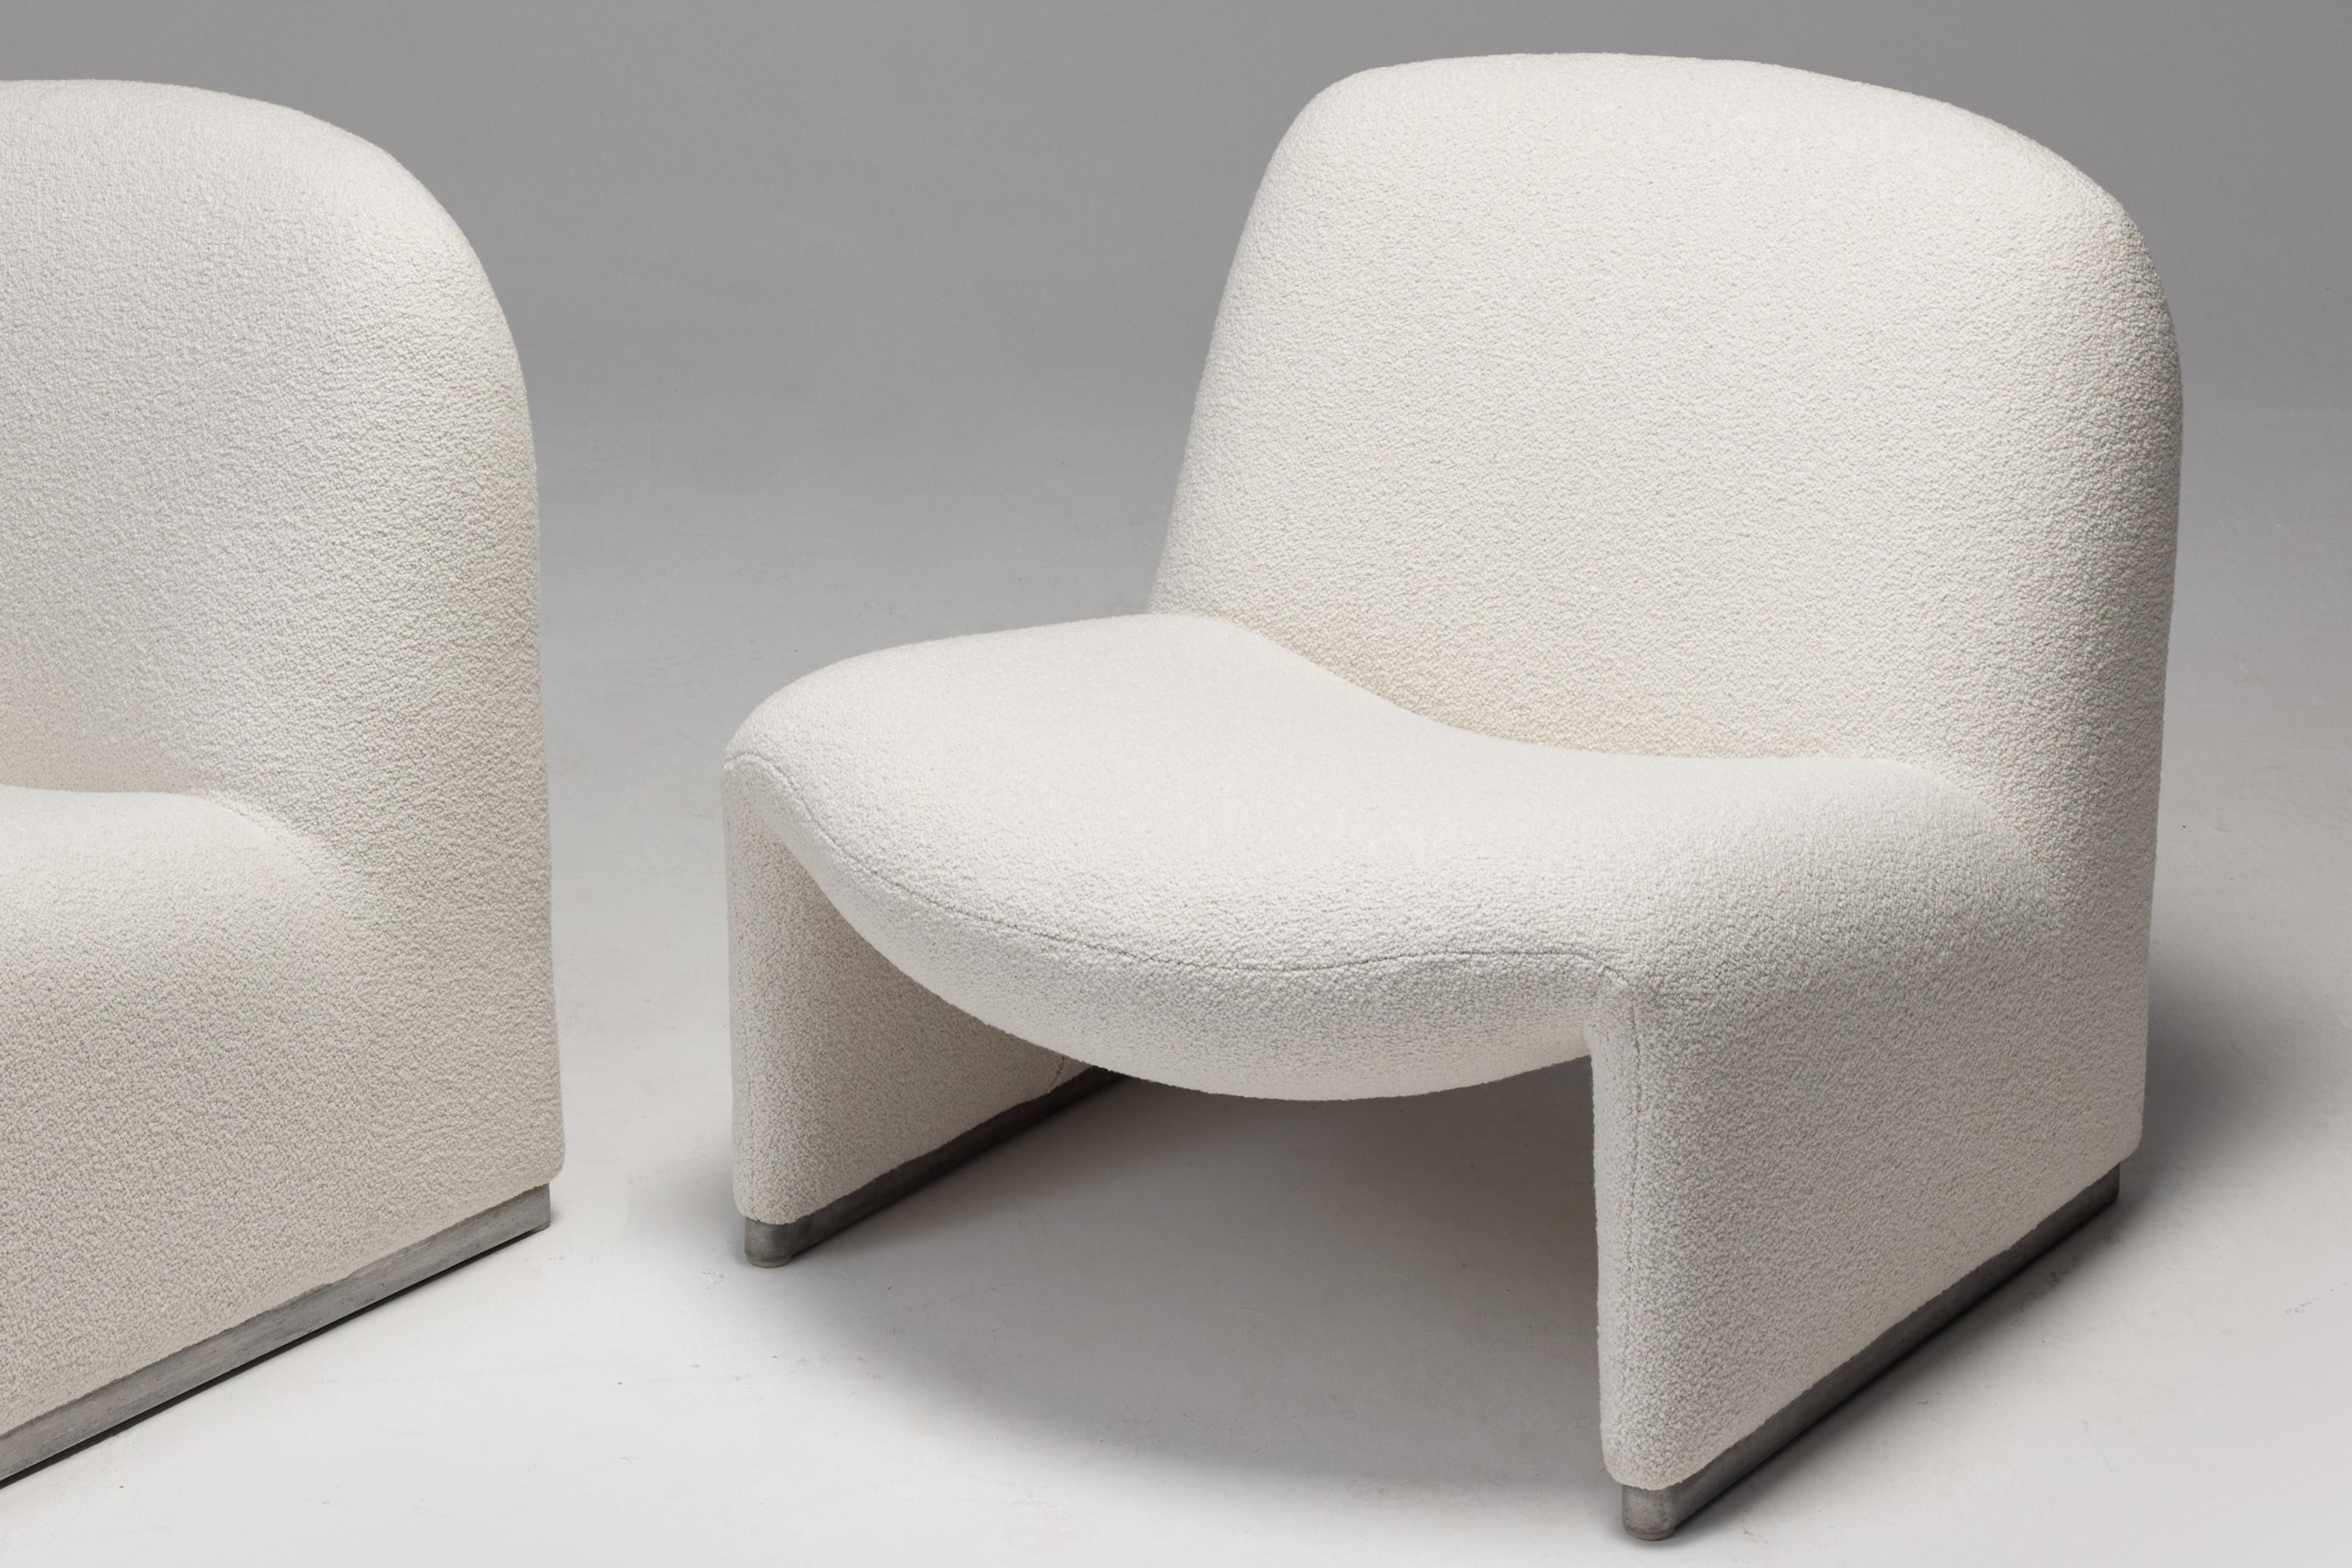 Vintage Alky Chairs in Off-White Fabric by Giancarlo Piretti for Artifort, 1970s For Sale 1